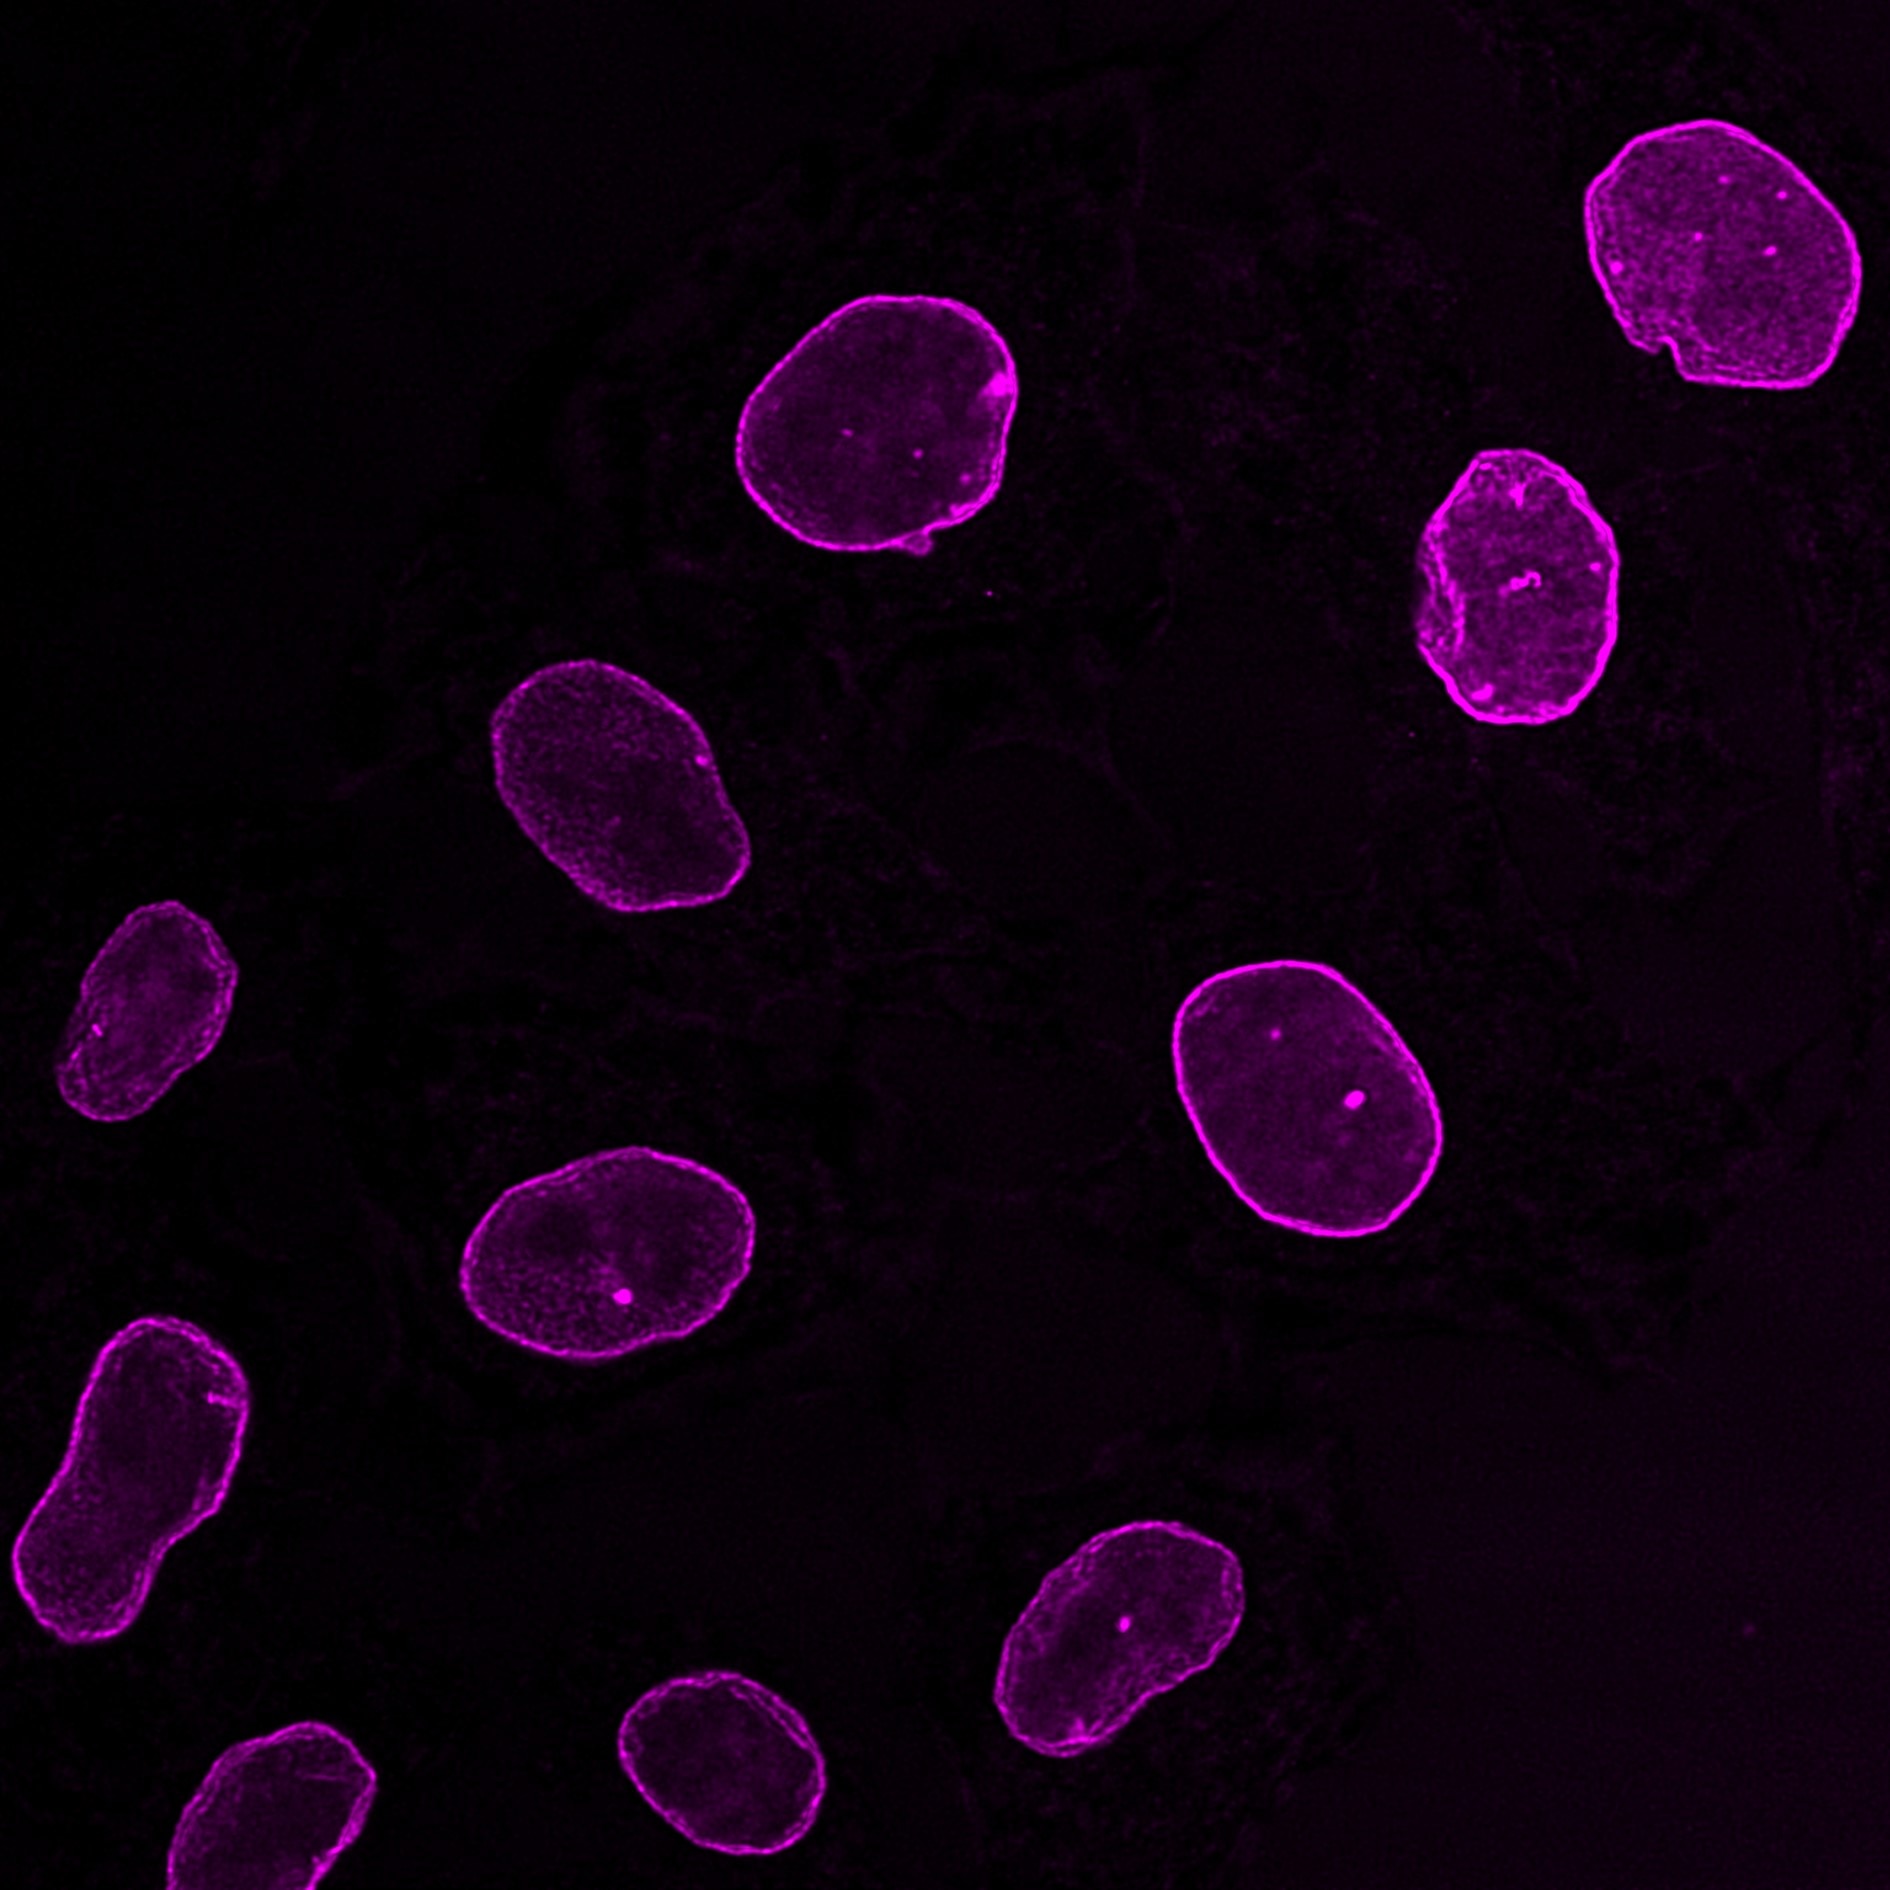 Immunofluorescence analysis of HeLa cells stained with mouse IgG2b anti-Lamin A/C antibody and Nano-Secondary® alpaca anti-mouse IgG2b, recombinant VHH, CoraLite® Plus 647 (smsG2bCL647-1, magenta). Images were recorded at the Core Facility Bioimaging at the Biomedical Center, LMU Munich.